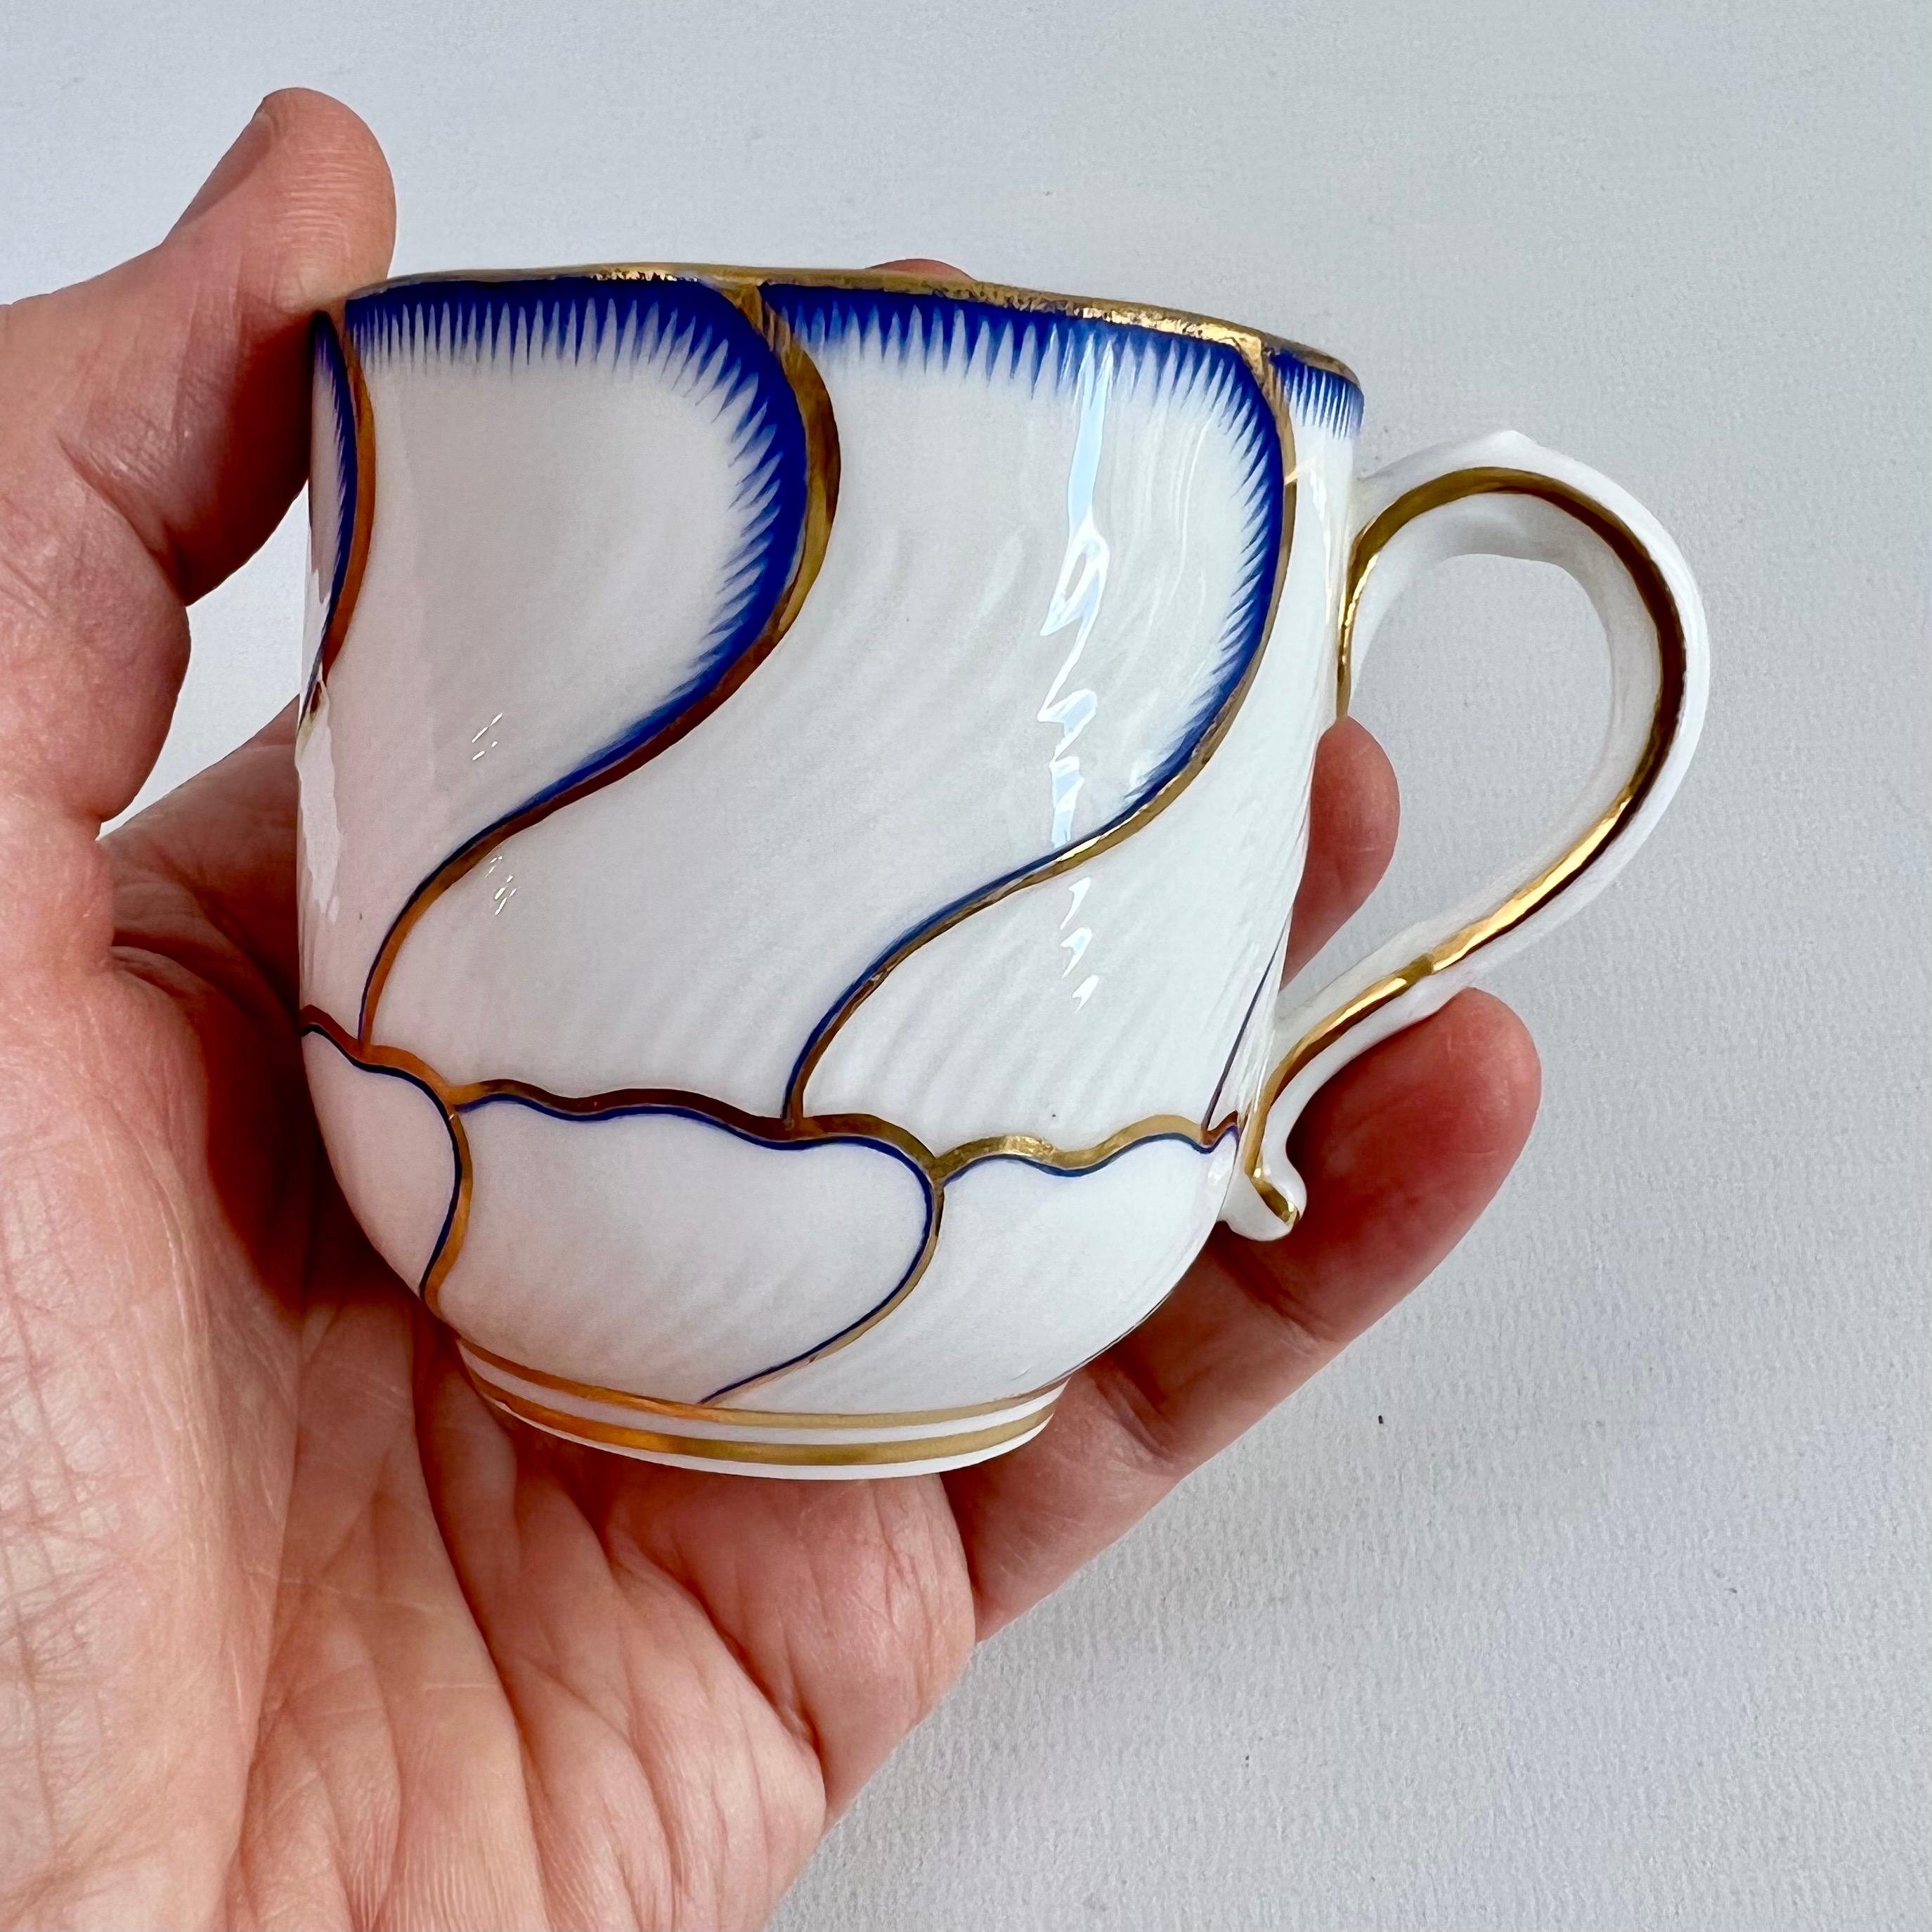 This is a sublime little orphaned coffee cup made by Minton around the year 1881. It would make a perfect gift for the holidays.

The cup is spirally fluted and has a very striking pattern of flowing sections, each bordered by a blue 